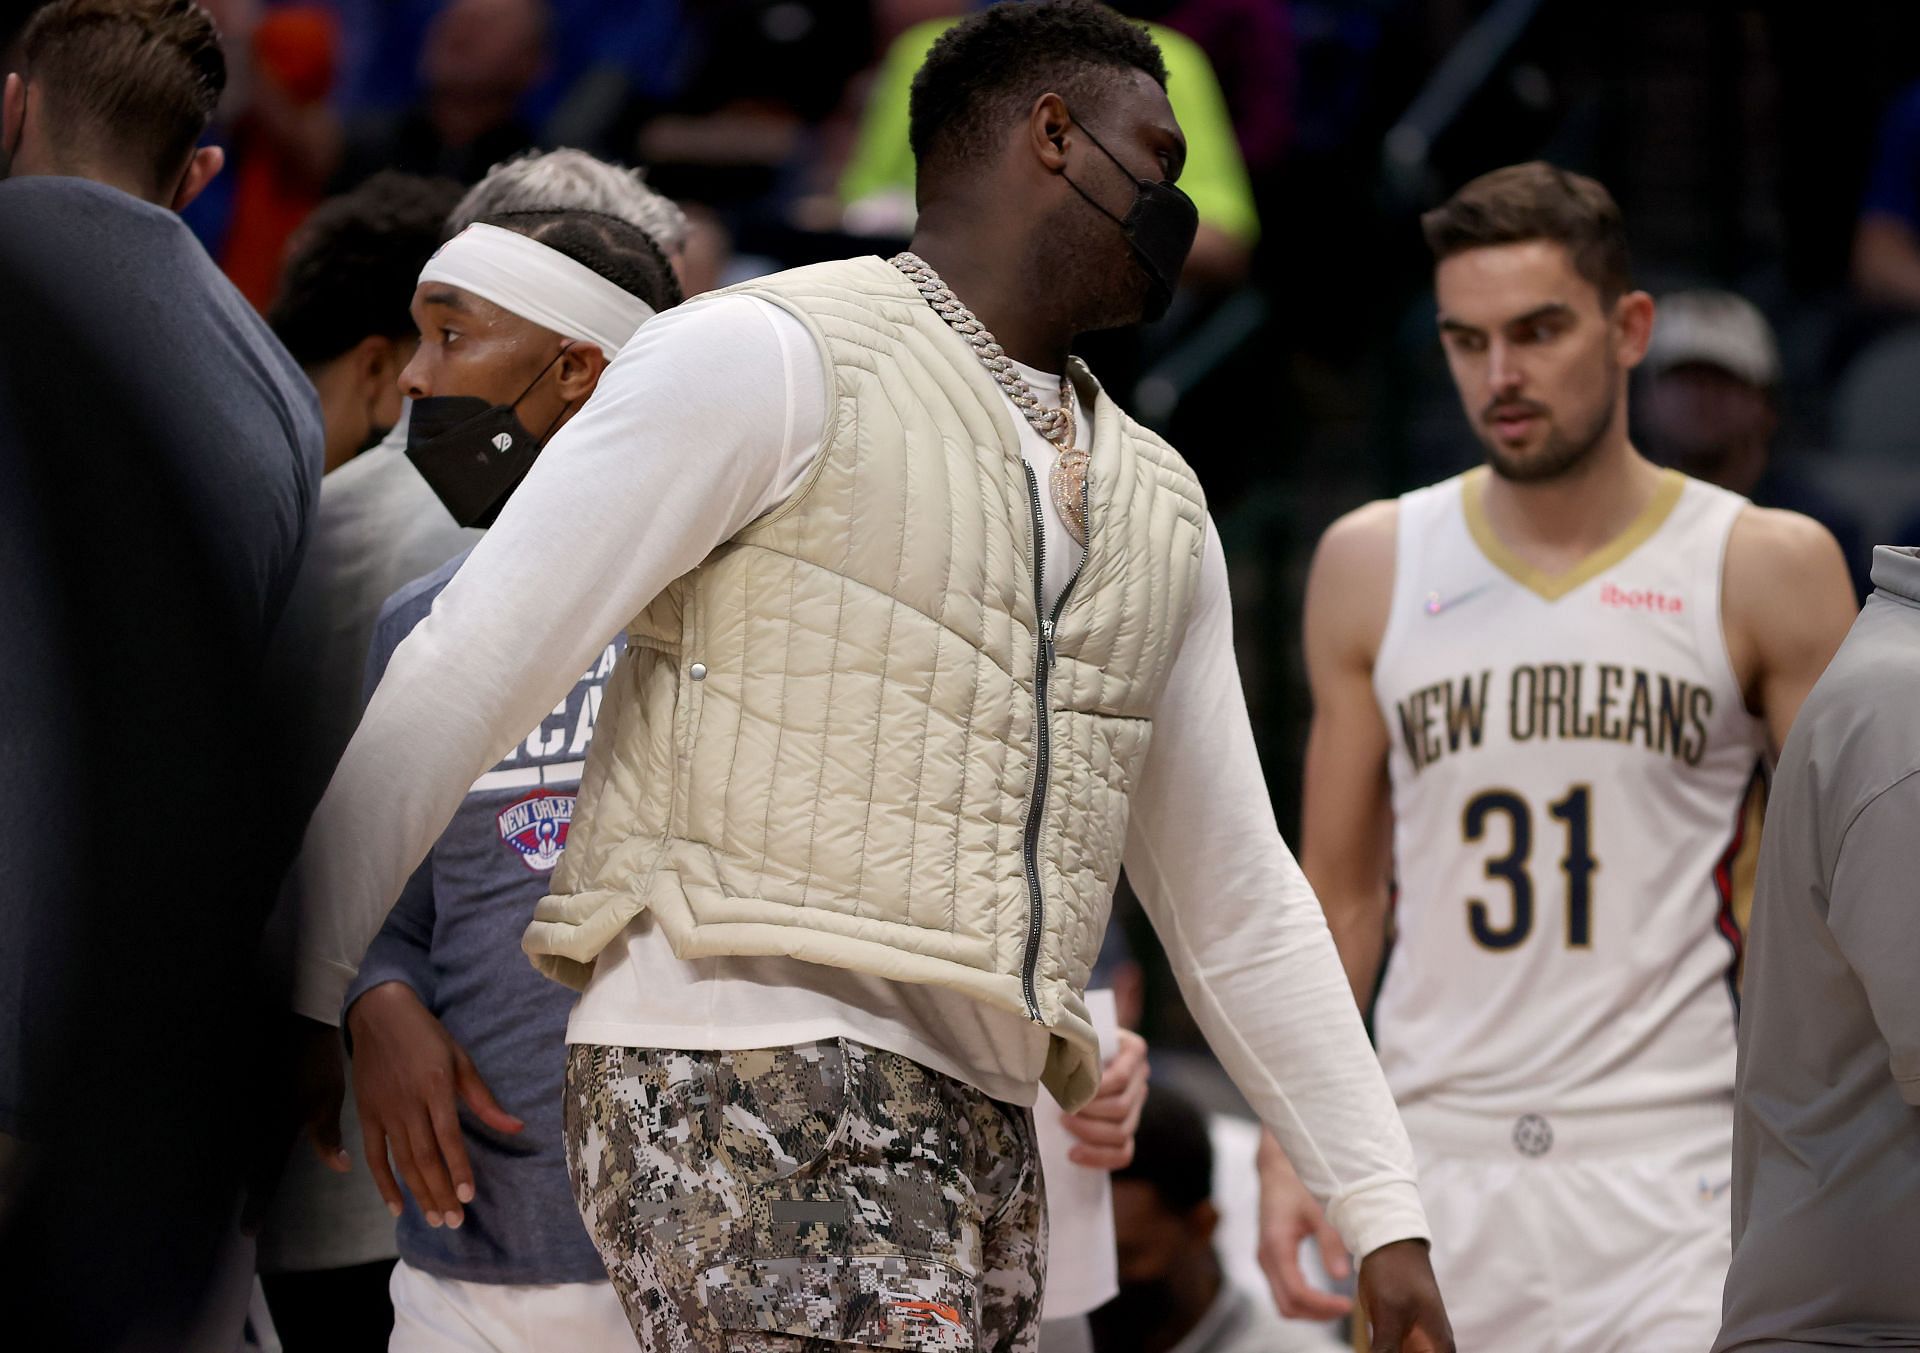 Zion Williamson will continue to be sidelined for the New Orleans Pelicans